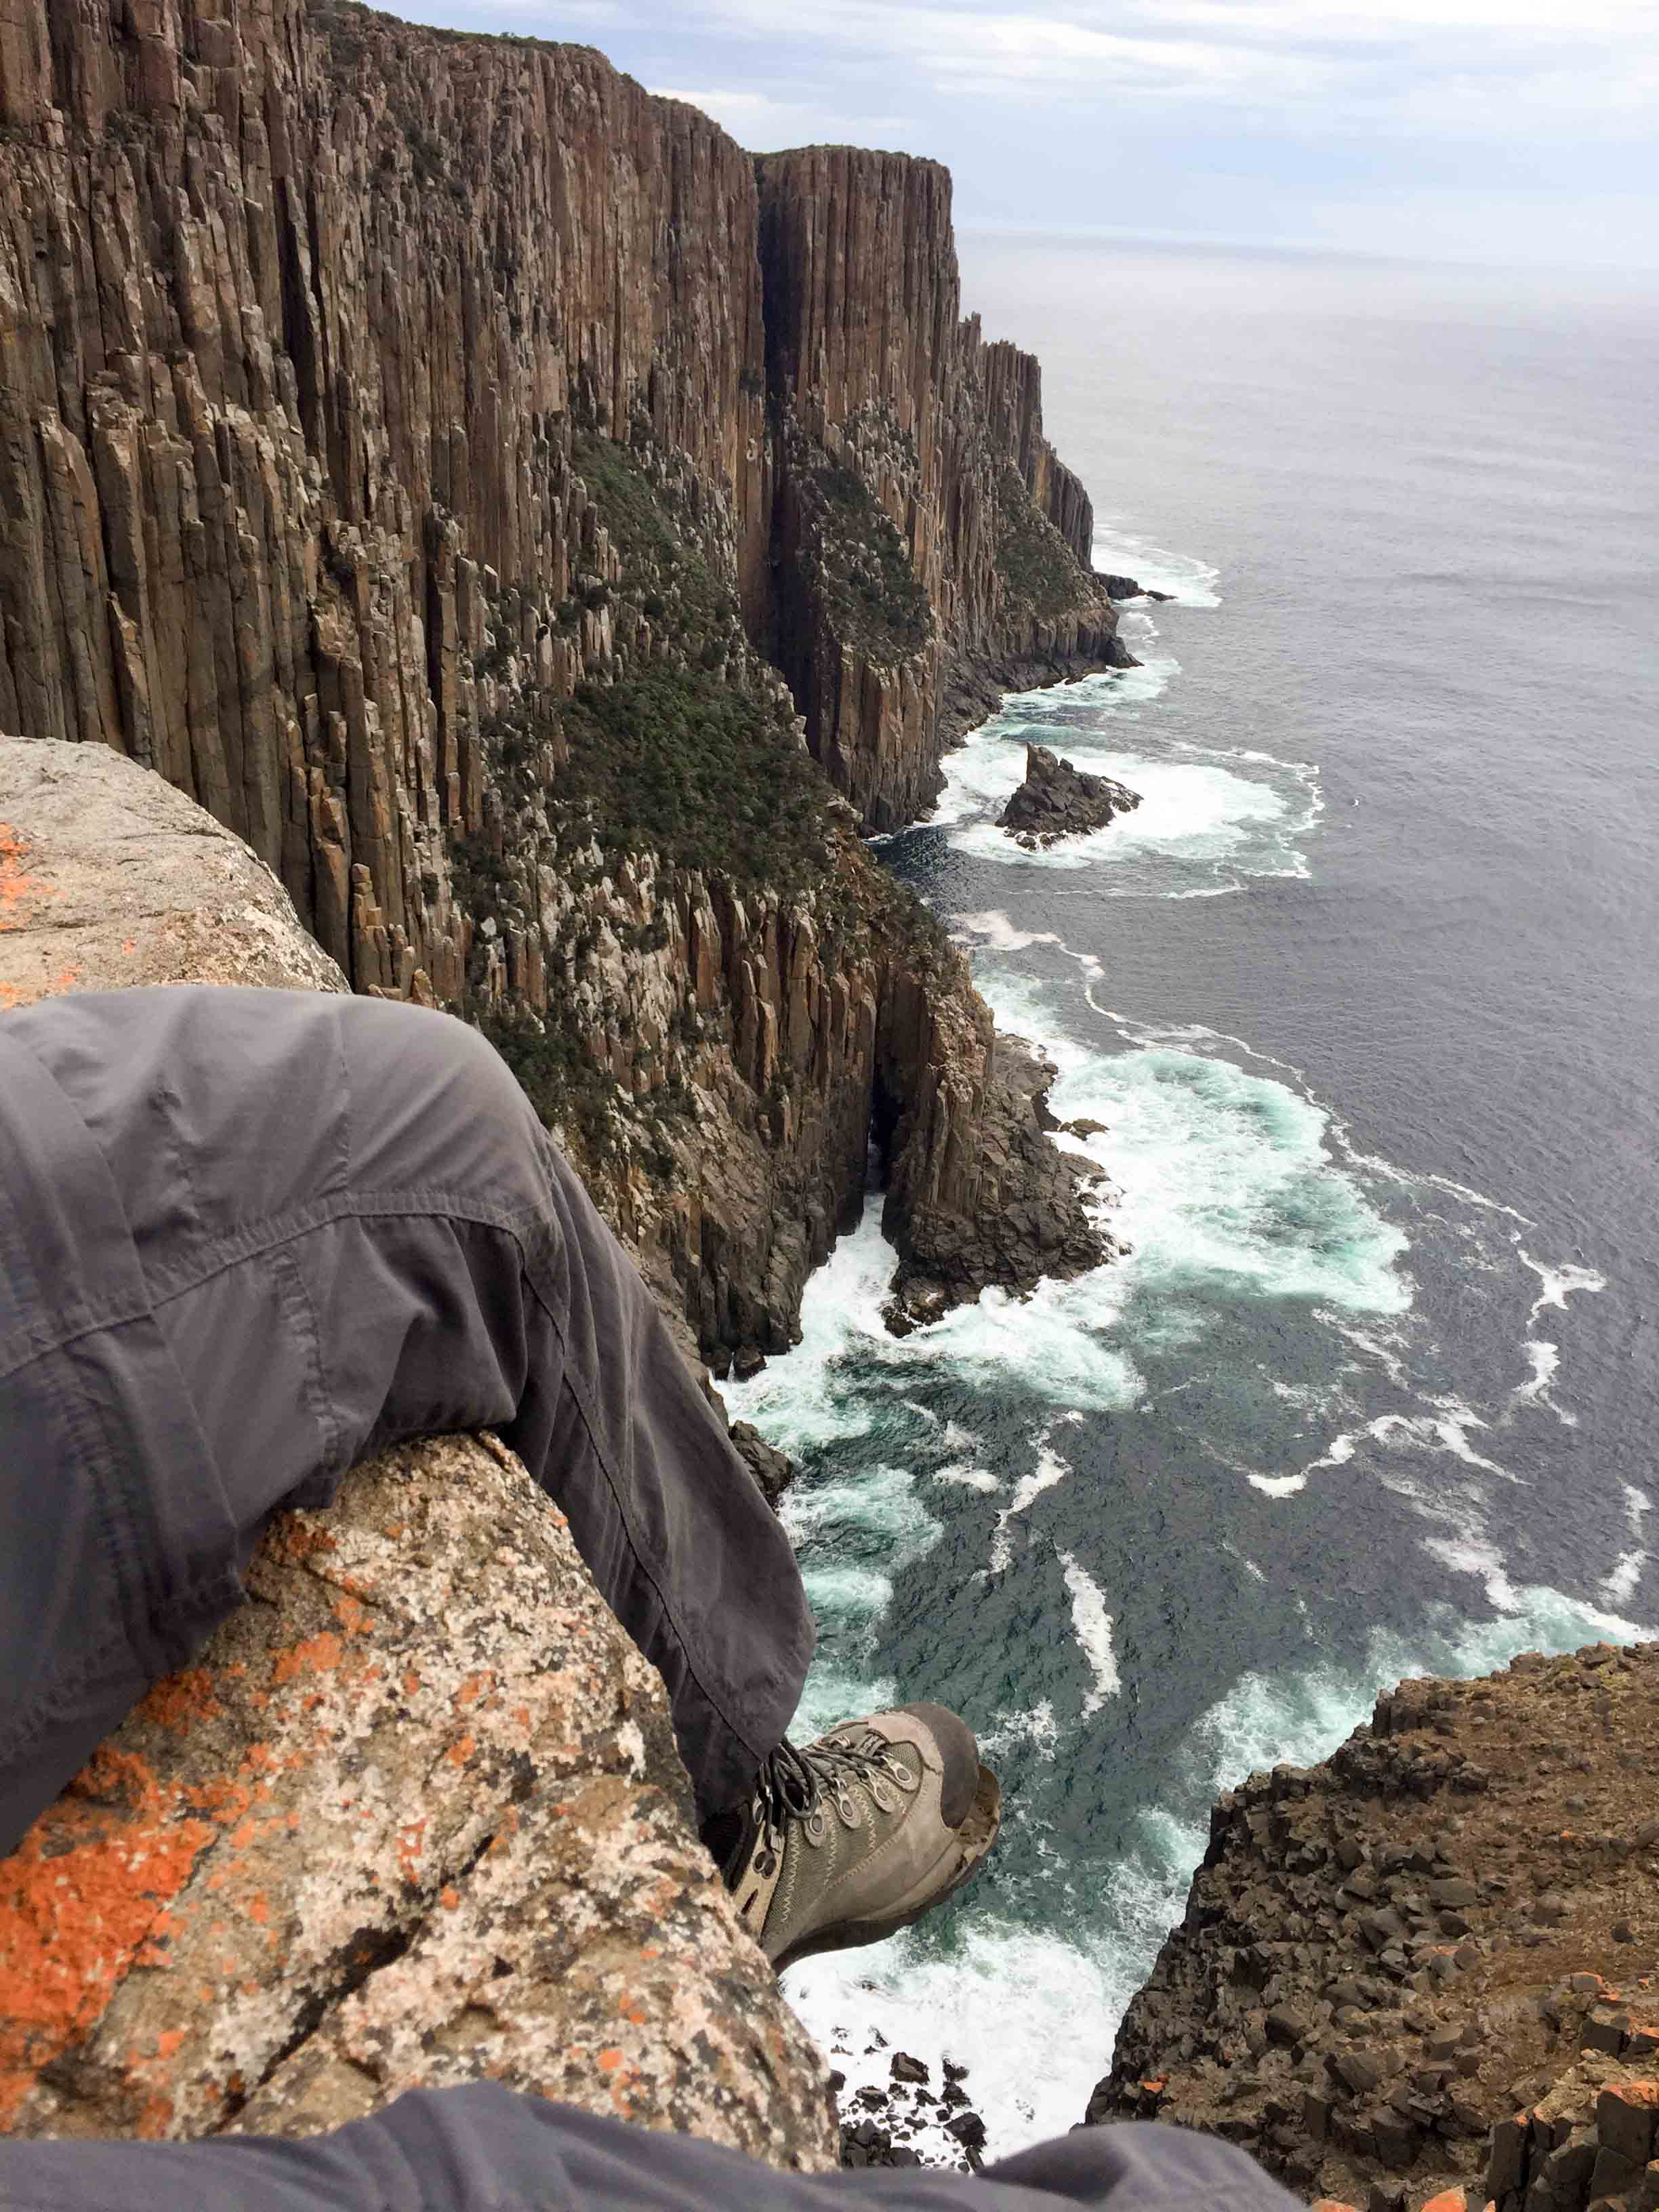 Hanging off a cliff in Tasmania